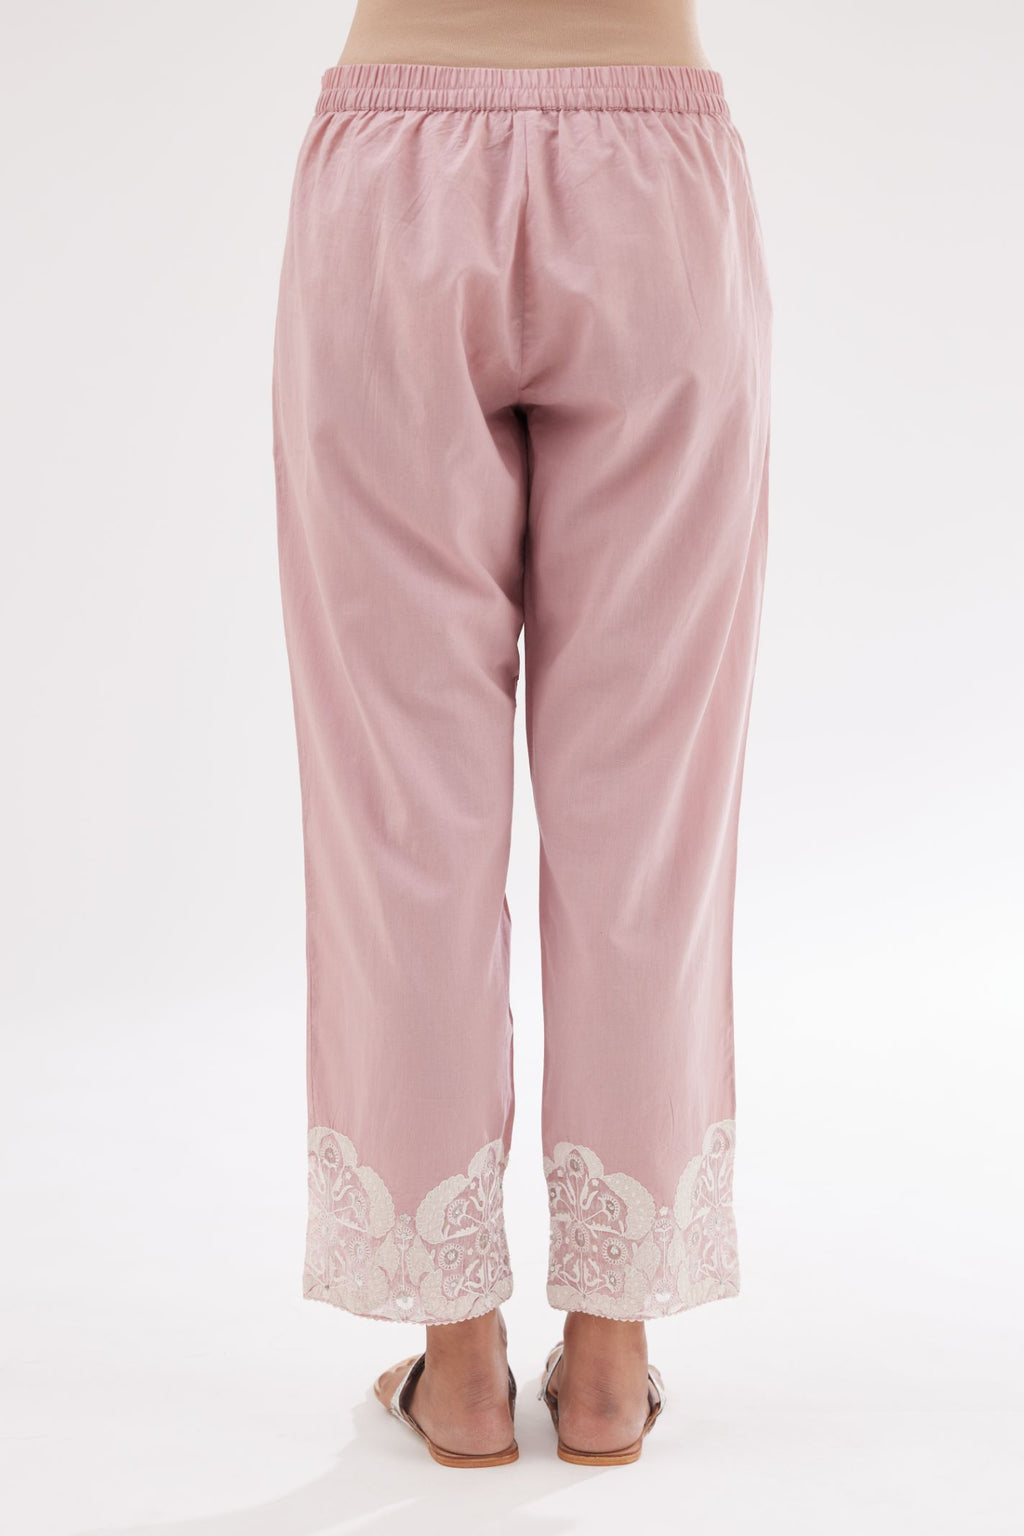 Pink cotton straight pants with appliqué and hand attached sequins detailing at bottom hem.